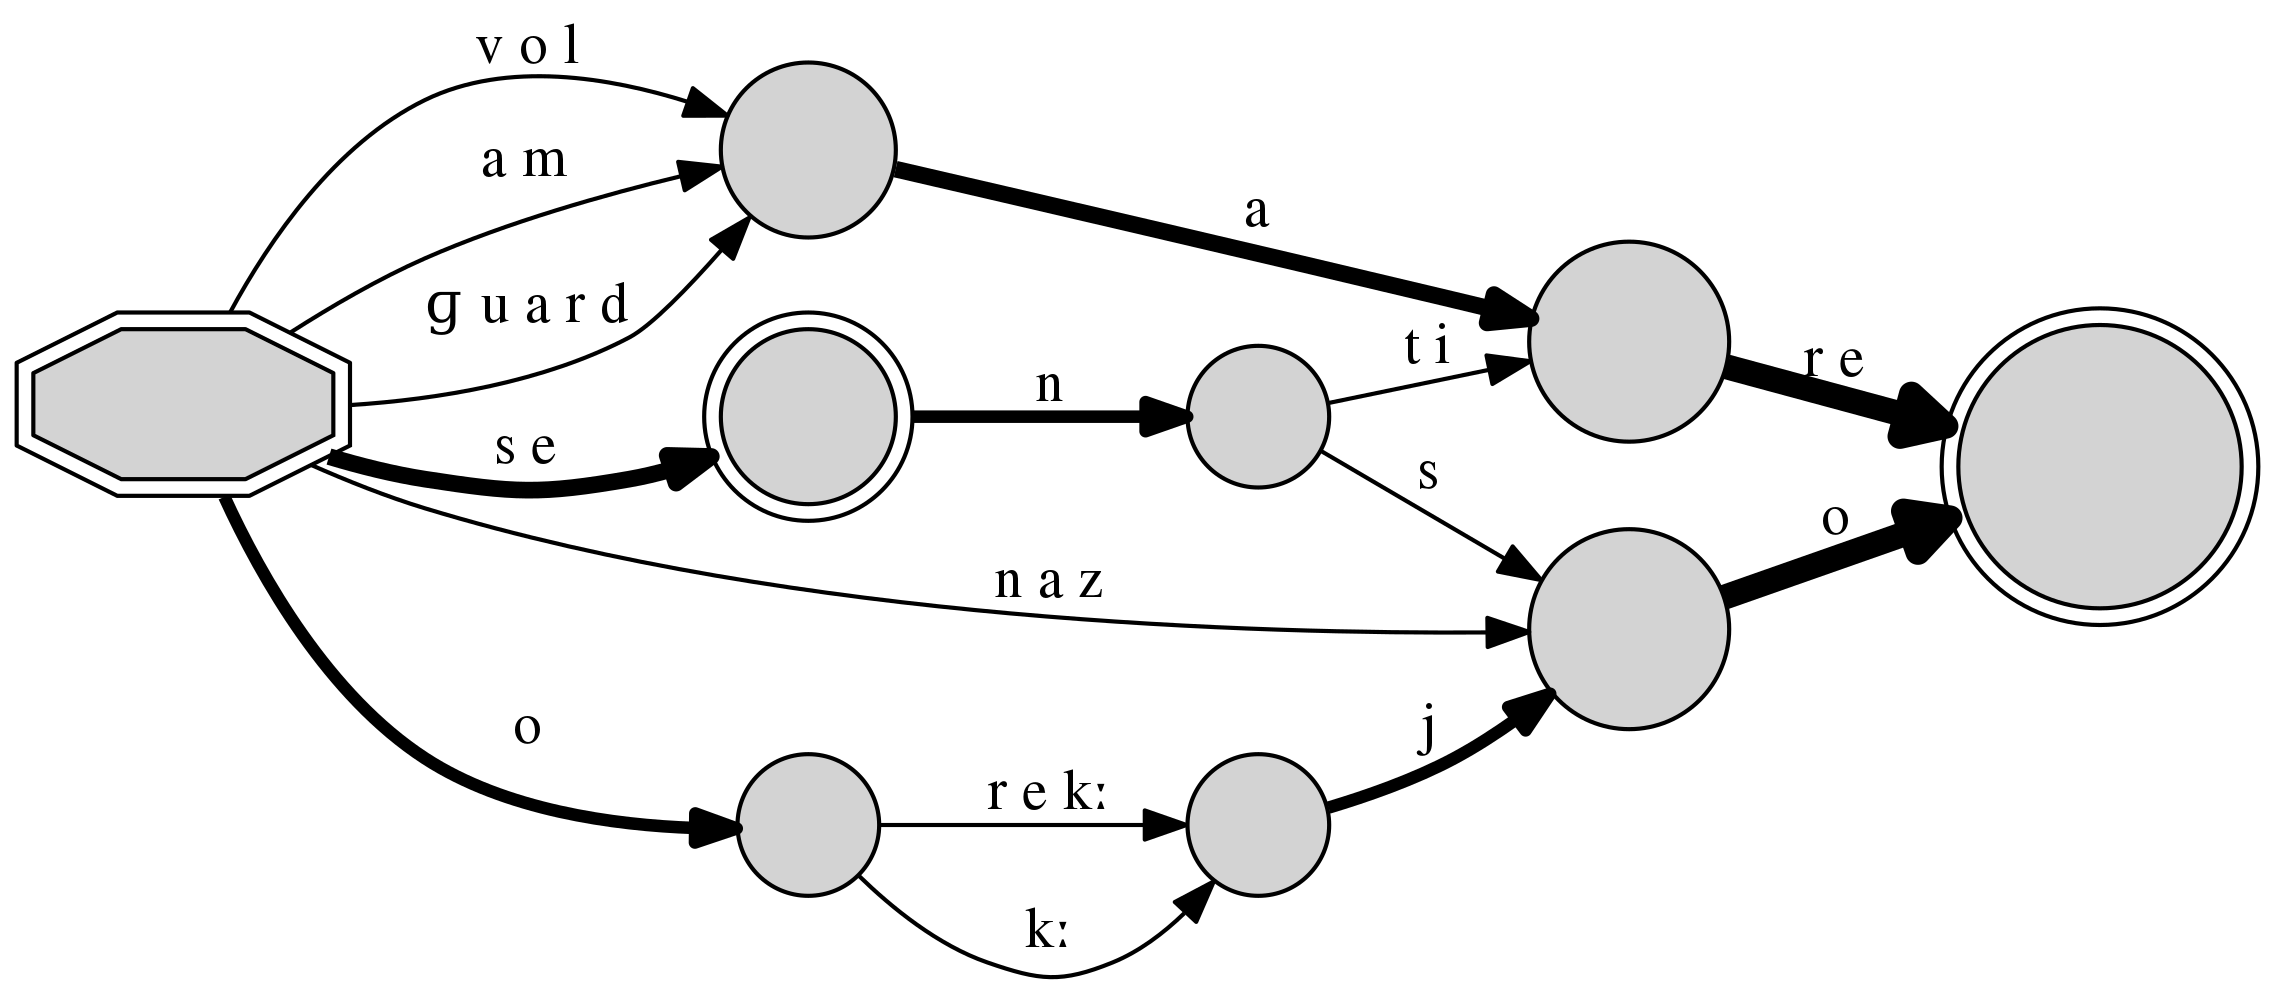 Example of a DAFSA graph